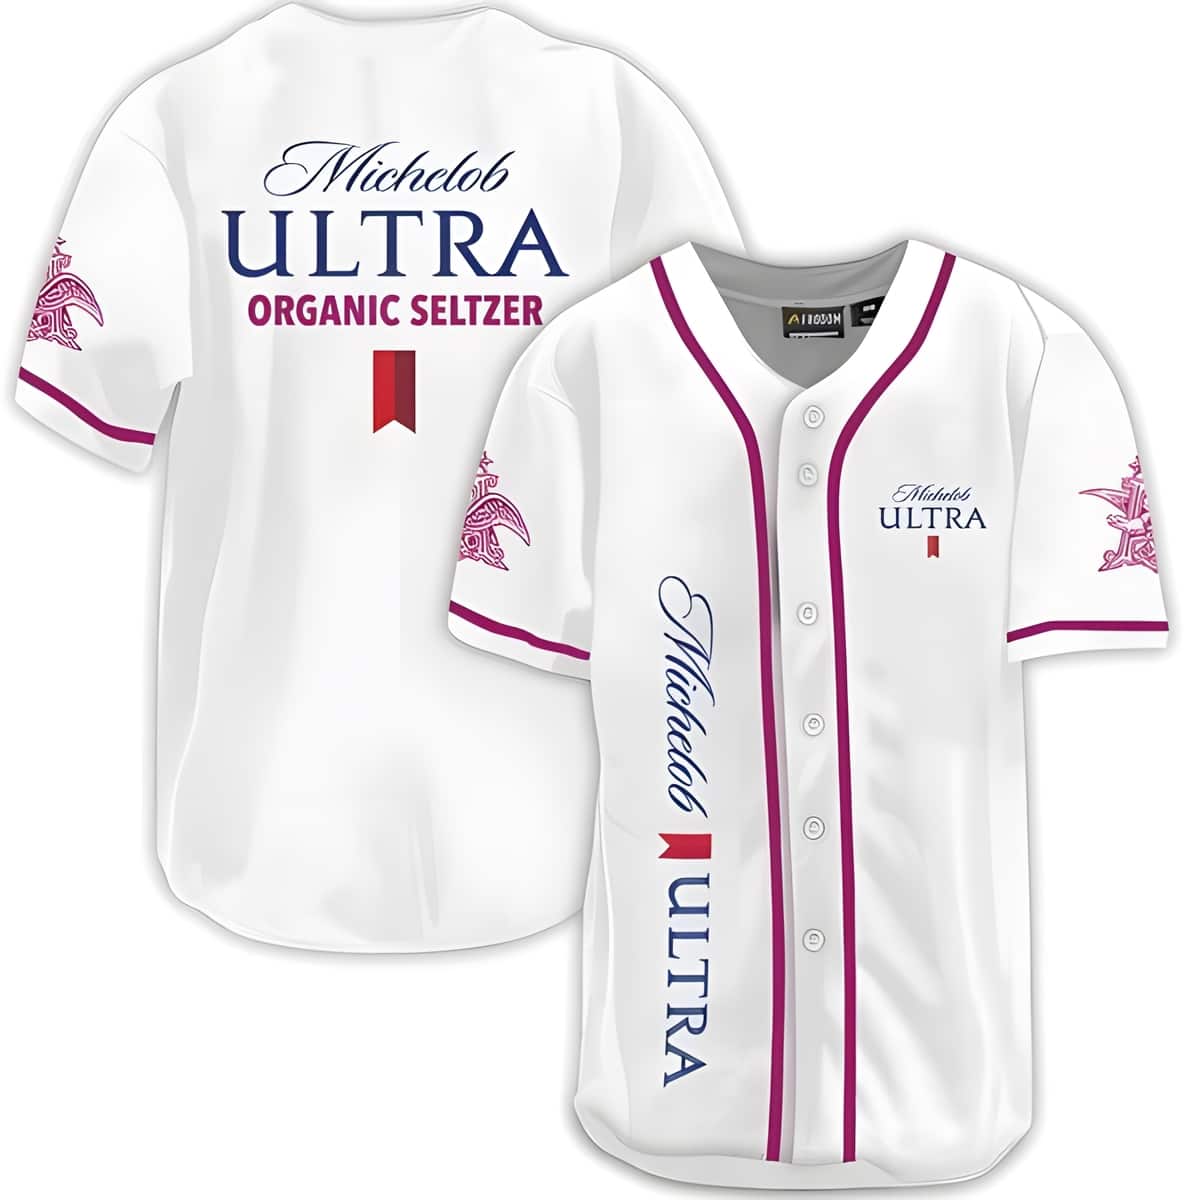 Michelob ULTRA Baseball Jersey Organic Seltzer Berry Hibiscus Beer Gift For Husband